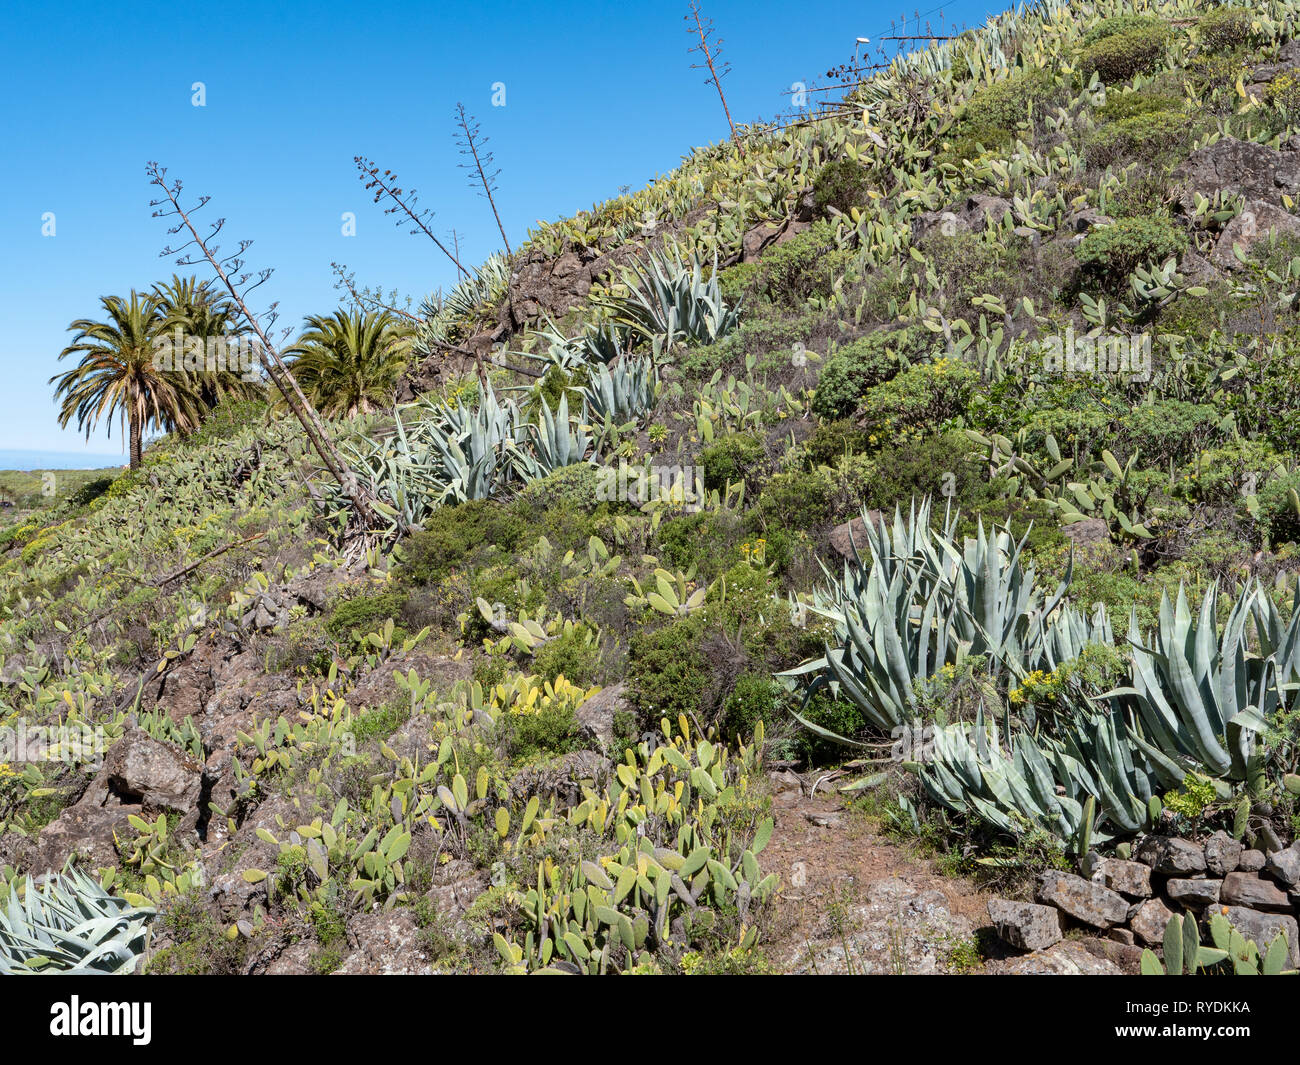 An arid hillside in La Gomera in the Canary Islands covered in aloes opuntia cacti and palm trees and other xerophytic vegetation Stock Photo